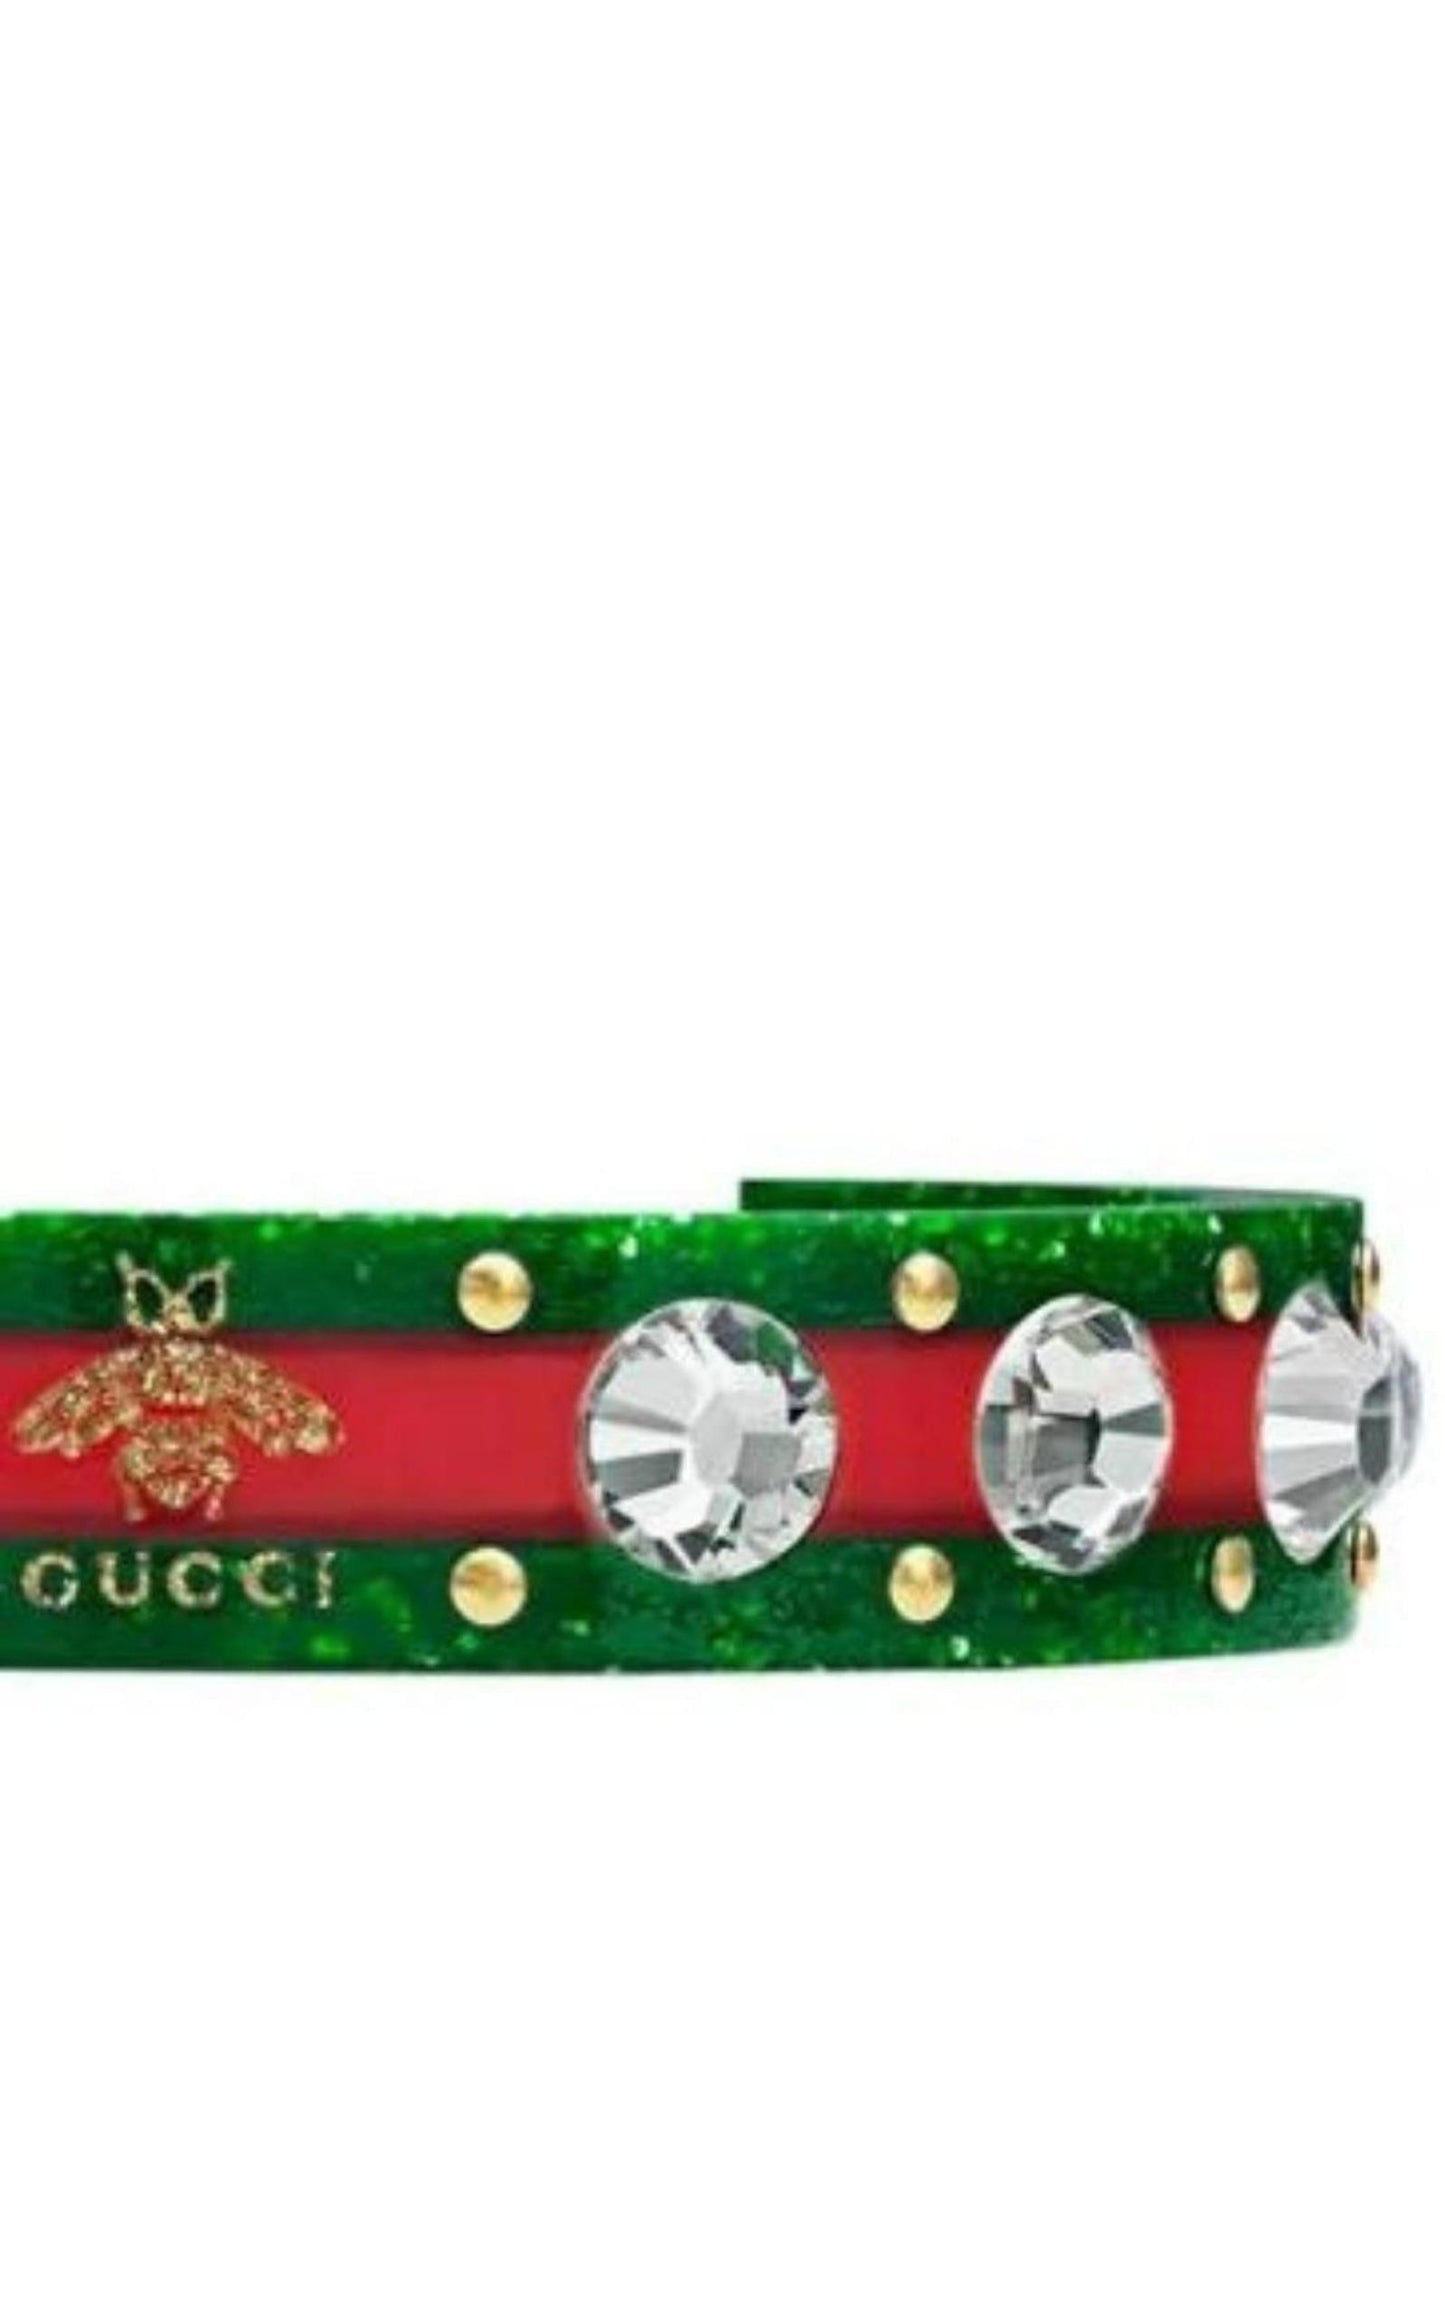  GucciVintage Web Cuff Bracelet With Crystals - Runway Catalog